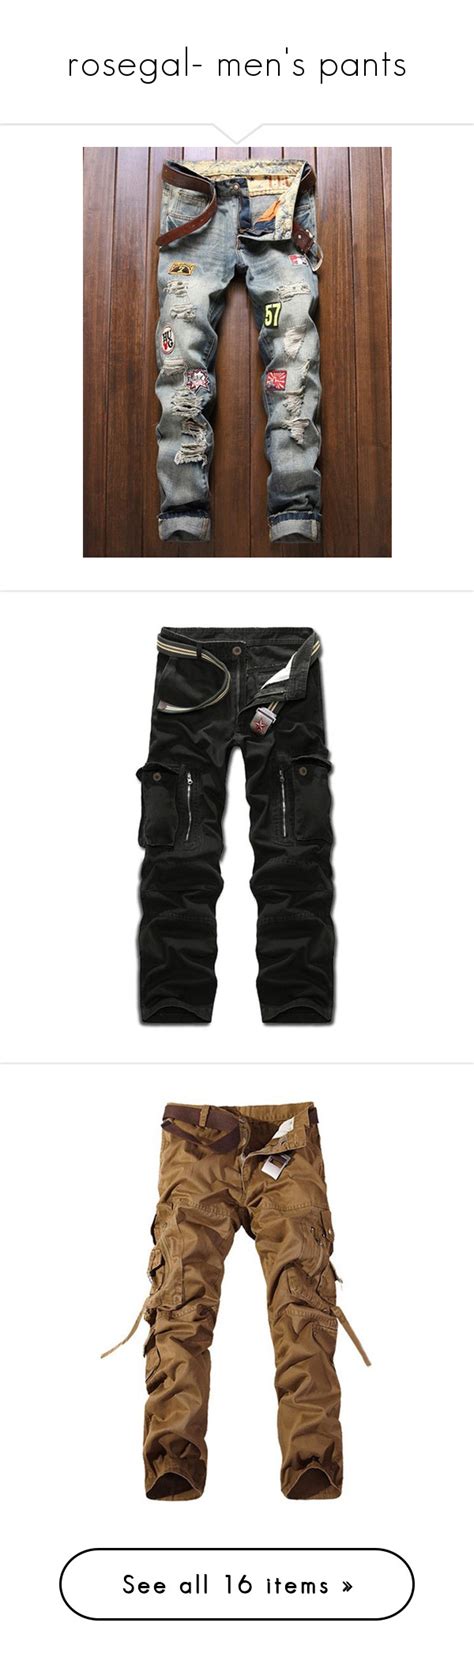 Rosegal Mens Pants By Fshionme Liked On Polyvore Featuring Alice